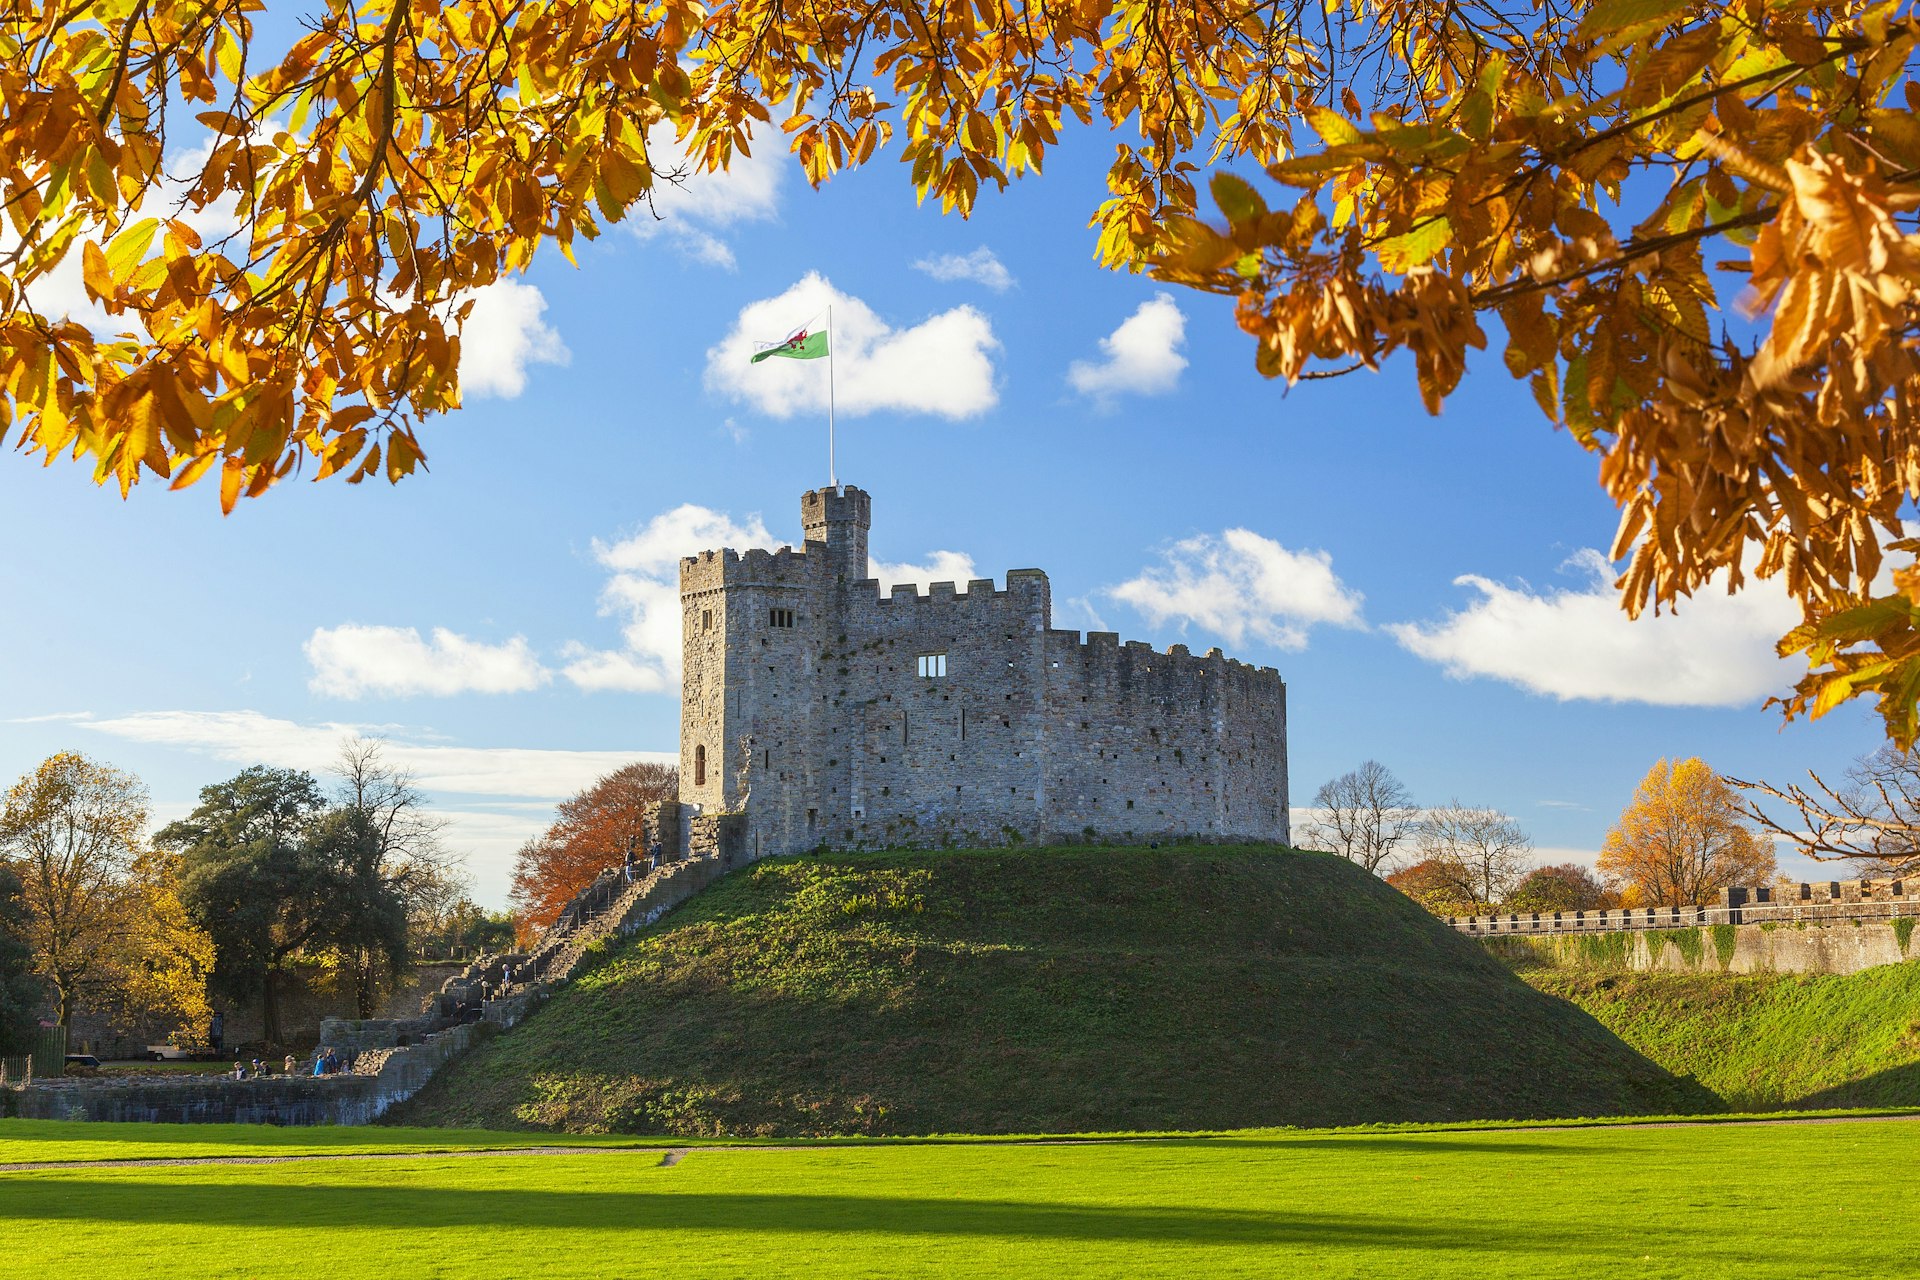 A view of Cardiff Castle, a stone castle atop a small hill, with the top of the image framed by autumn leaves. The sun shines in the background.